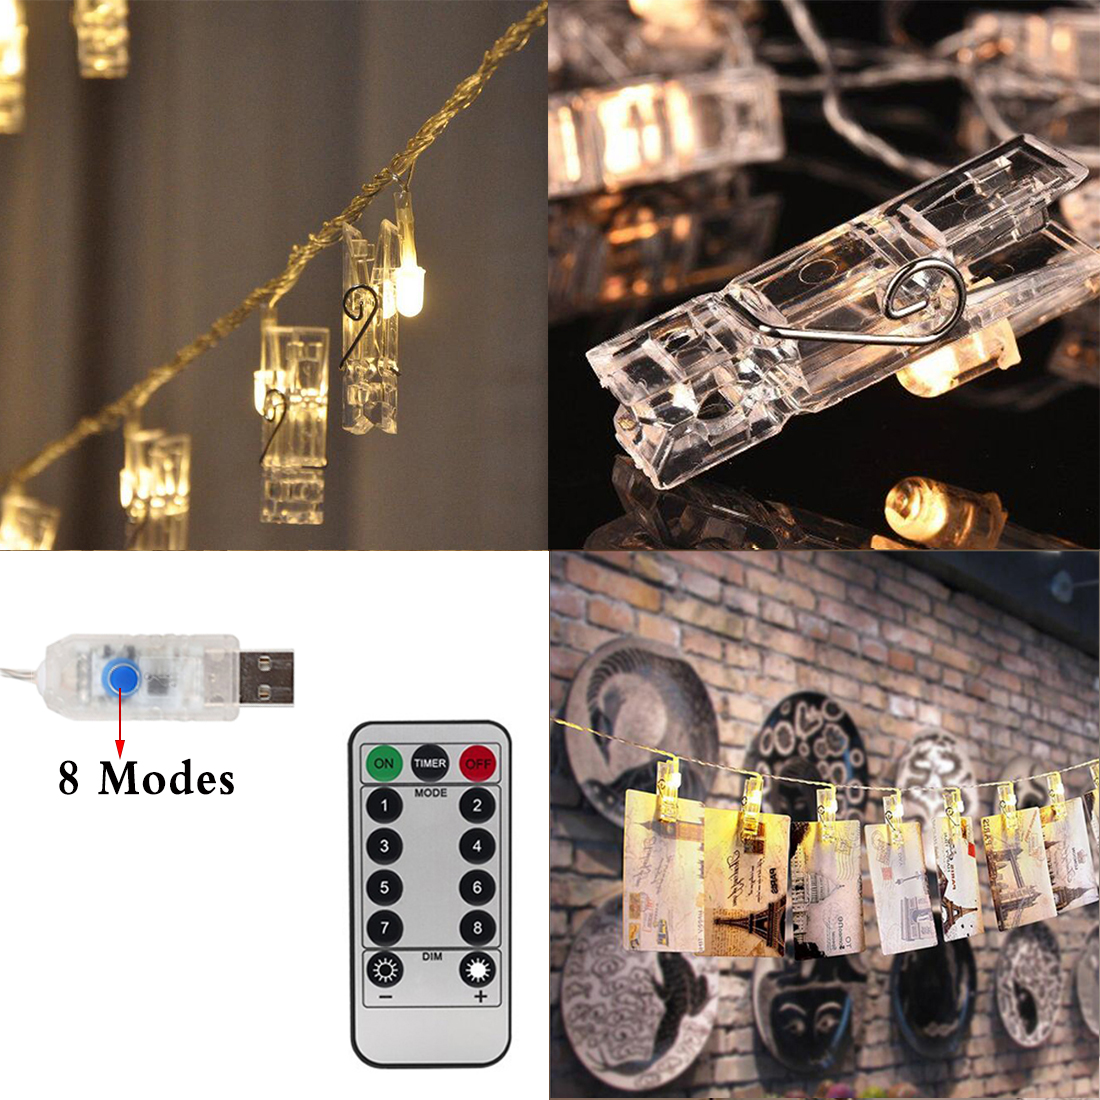 AnSaw Photo String Lights, 40 LED Hanging Display Starry Lights,Lighted Clips DIY Picture Cards Artwork, Home Fairly Decor Twinkle Light with 8 Remote Control Lighting Effects (USB Powered)